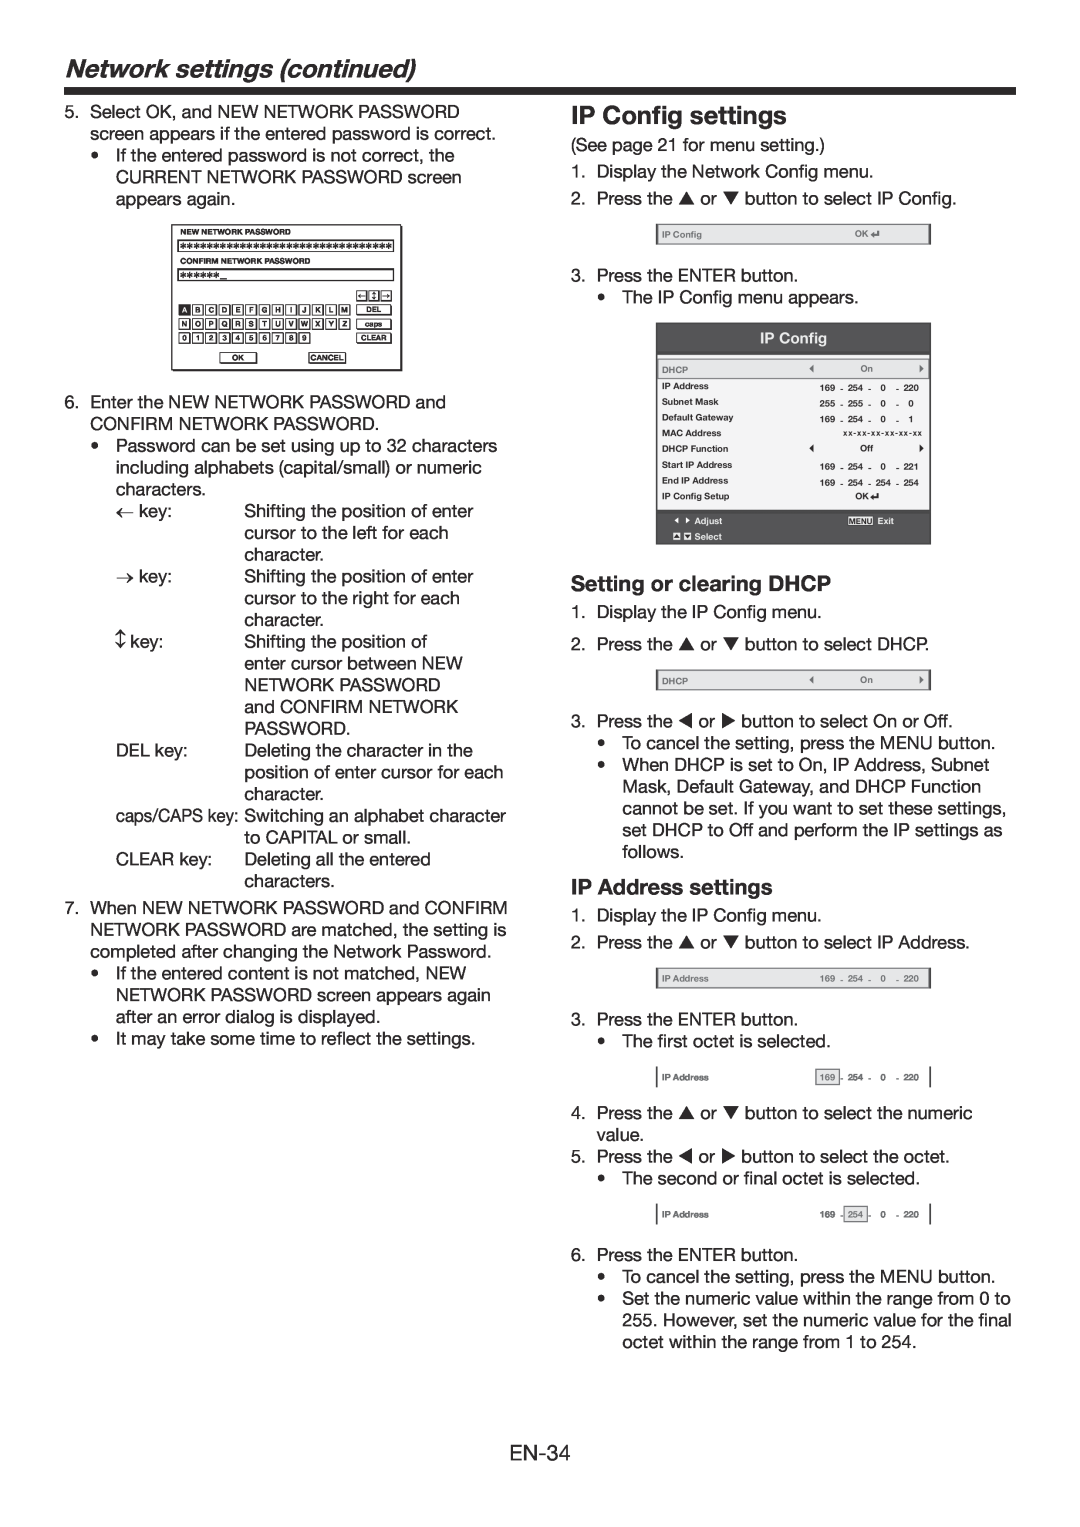 Mitsubishi Electronics WD385U-EST user manual Network settings continued, IP Config settings, Setting or clearing DHCP 